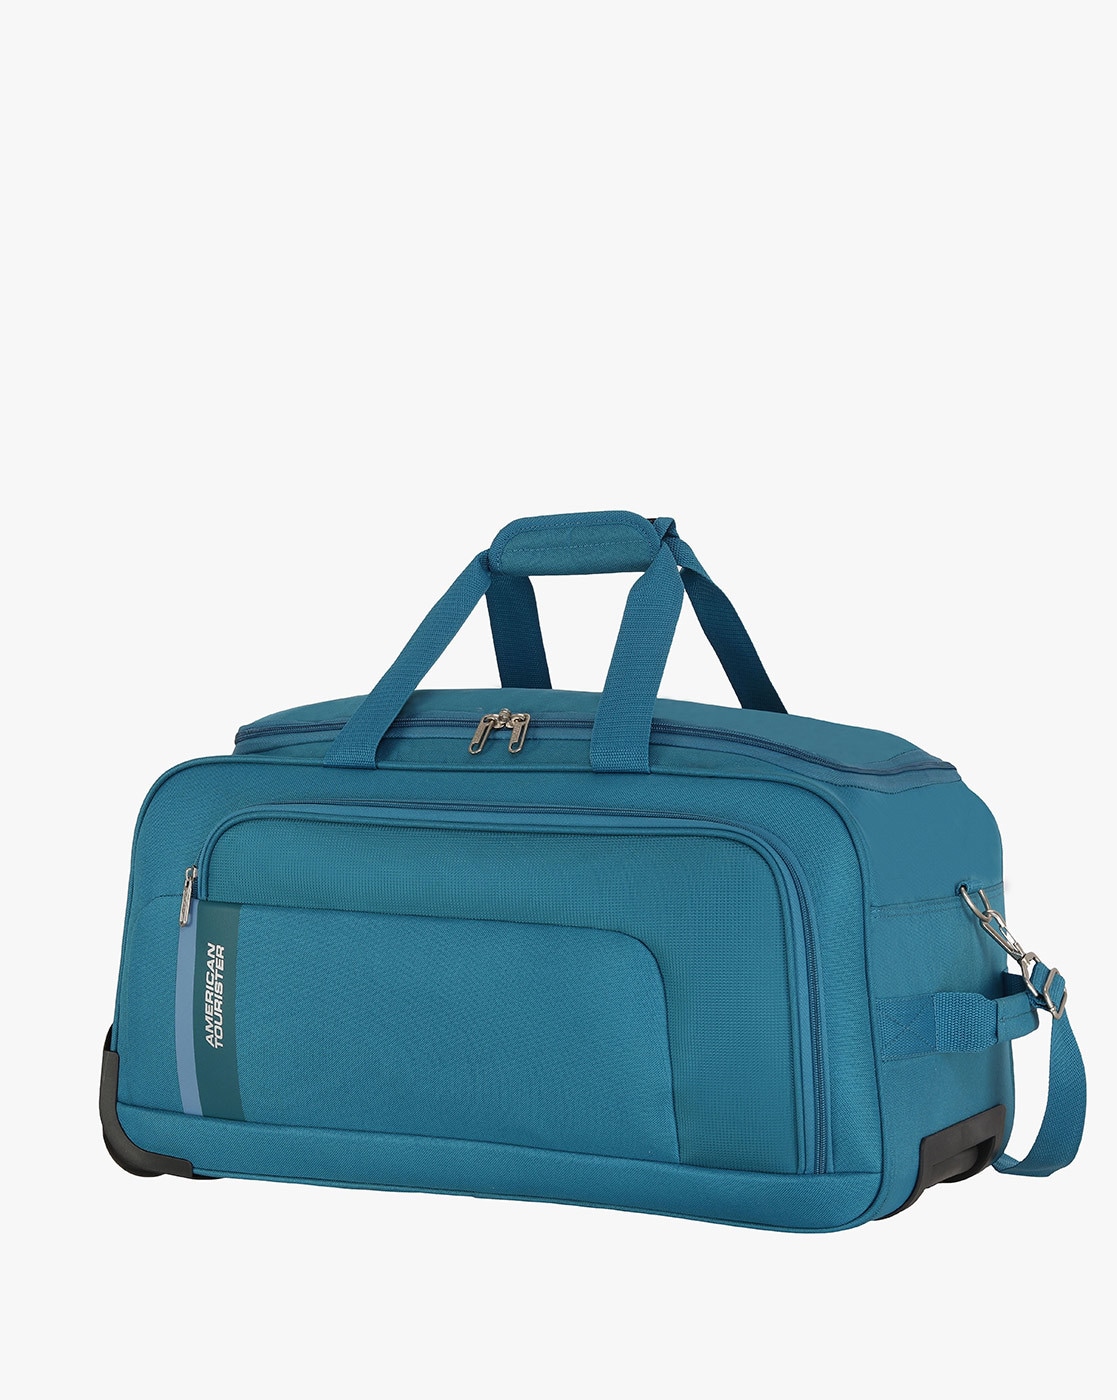 American Tourister Luggage Review - Soundbox 67 — The Discoveries Of